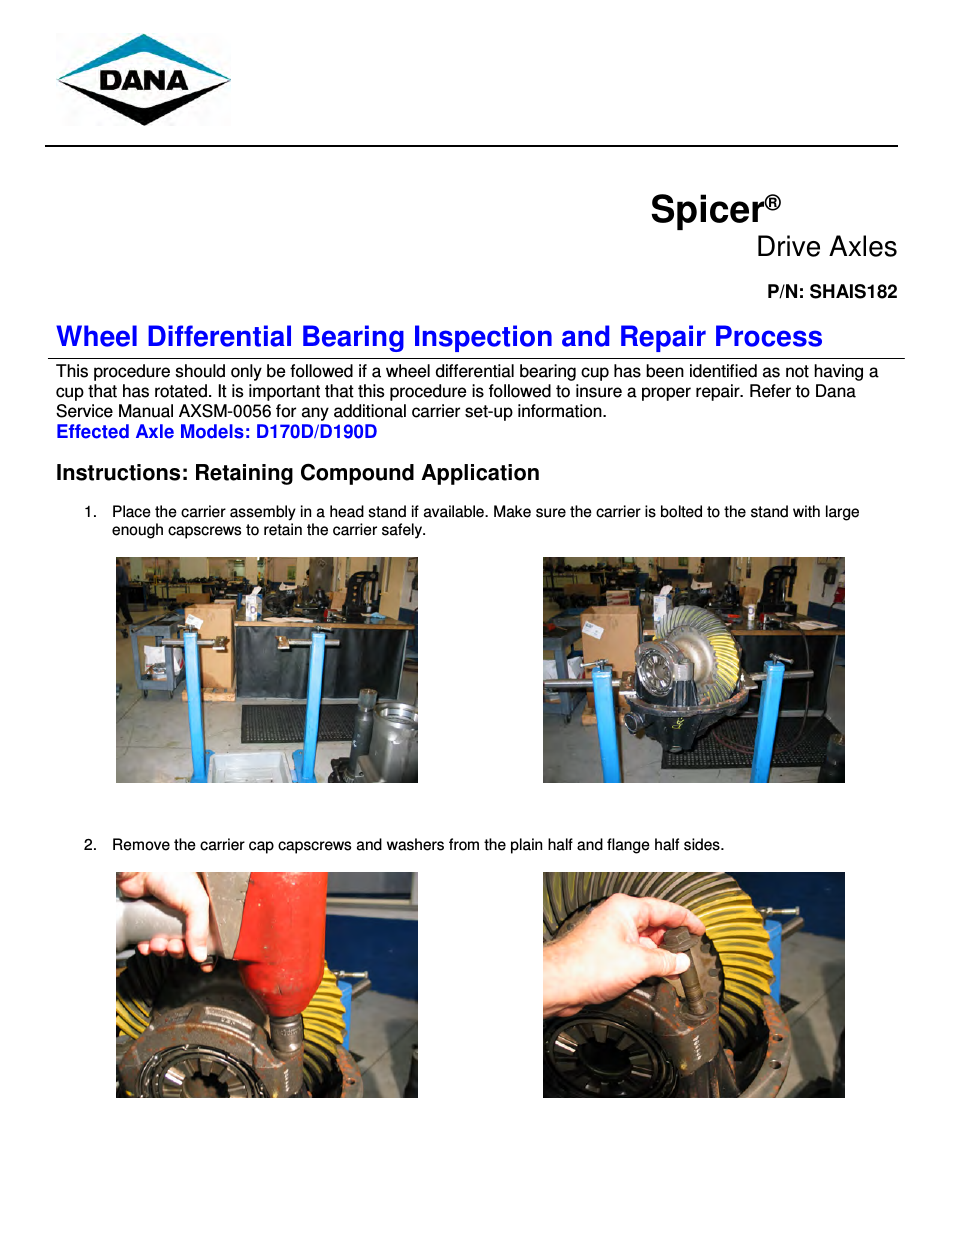 Wheel Differential Bearing Inspection and Repair Process